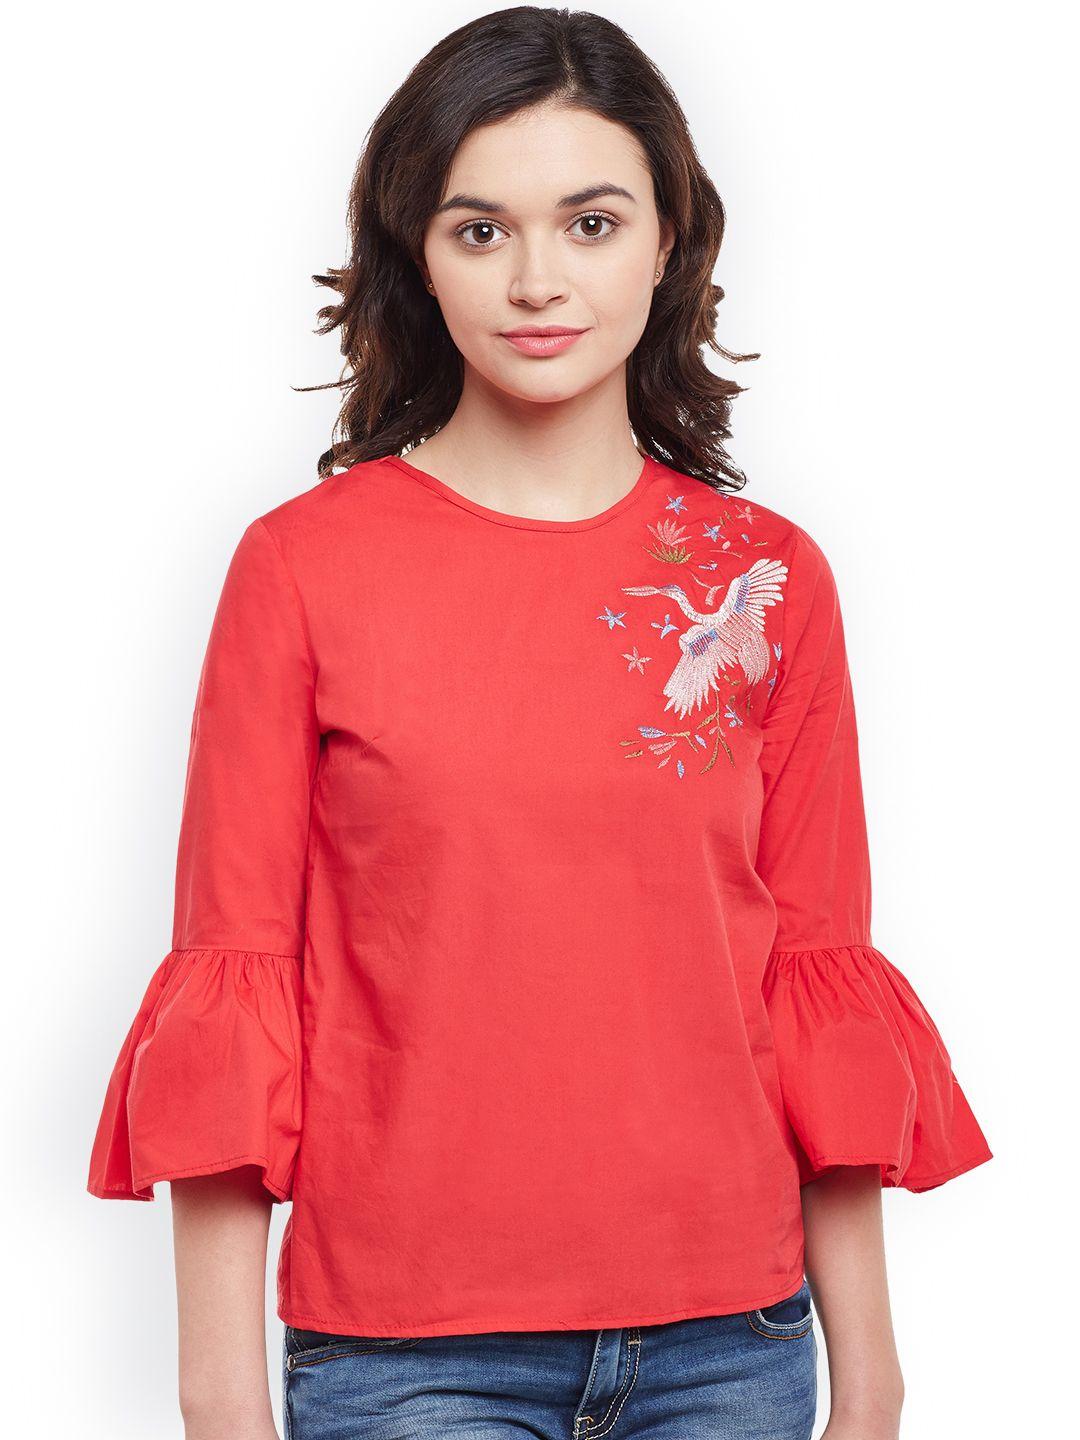 oxolloxo women coral embroidered top